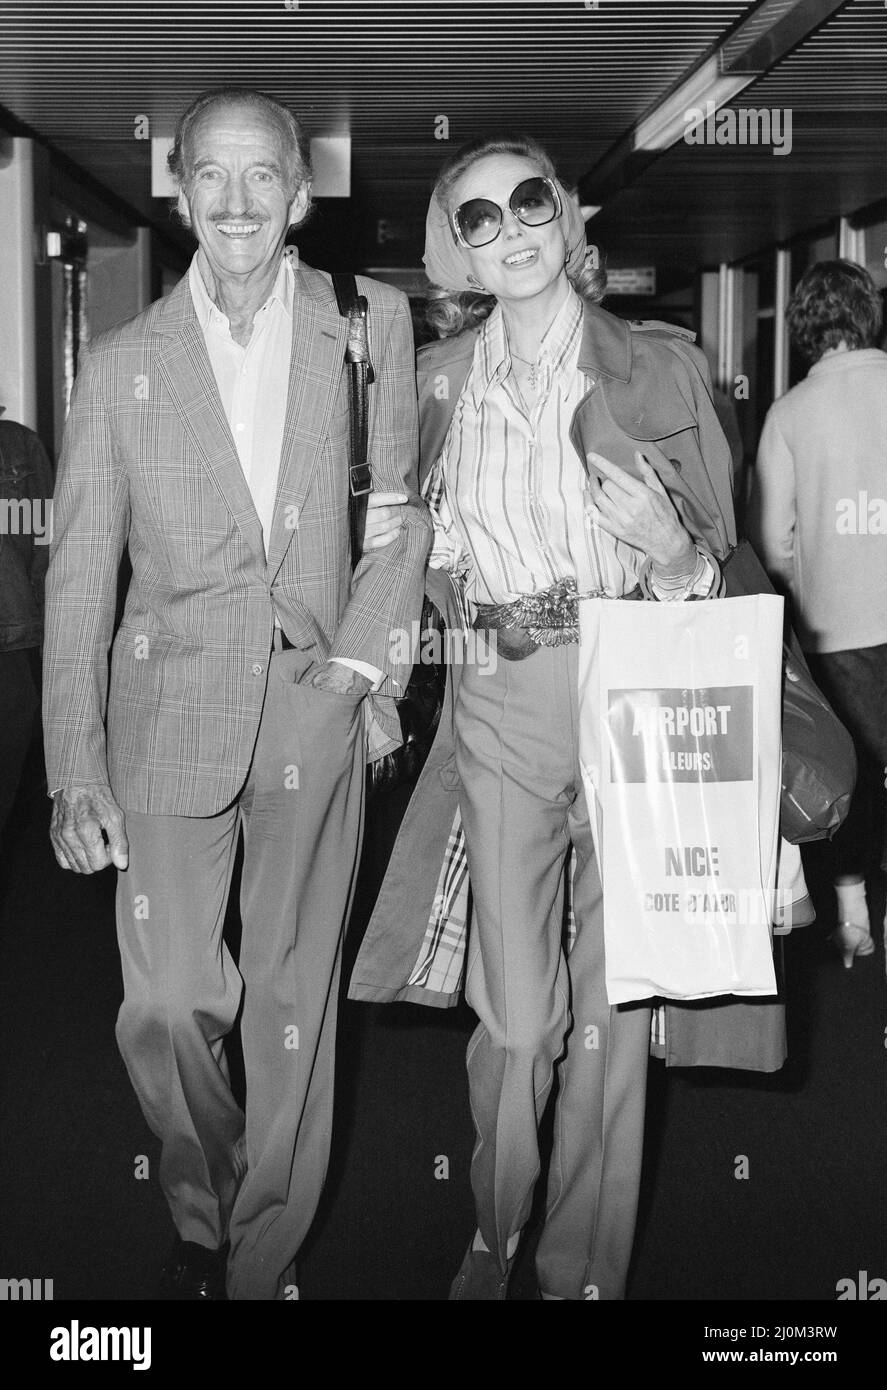 David Niven, British actor with wife Hjordis Paulina Genberg Tersmeden at London Heathrow Airport, arriving from Nice, 1st September 1982. Stock Photo